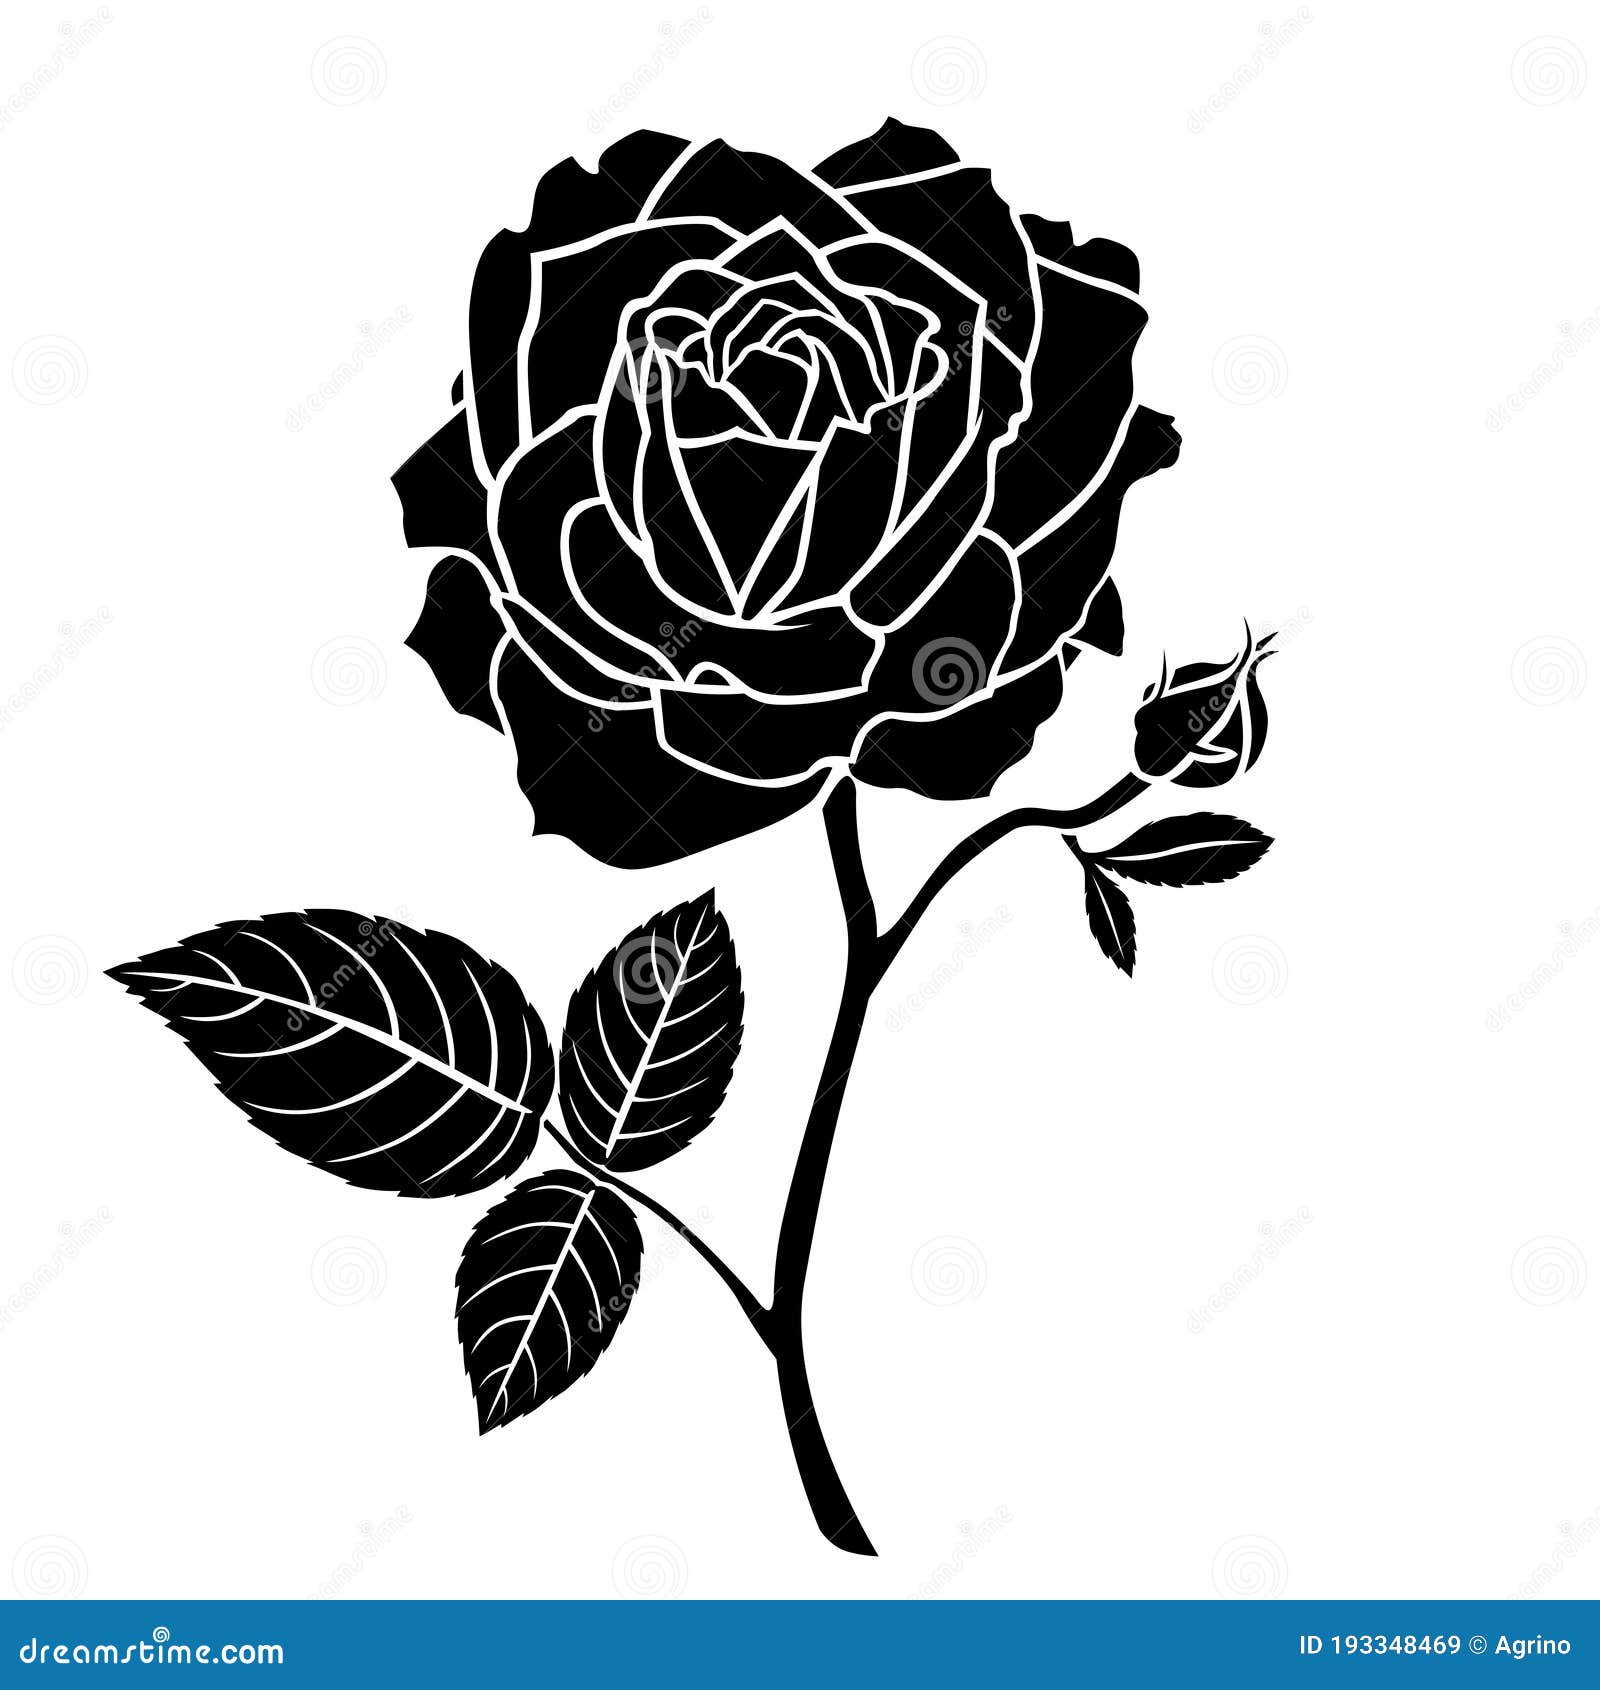 Silhouette of a Rose Flower with Bud Stock Vector - Illustration of ...